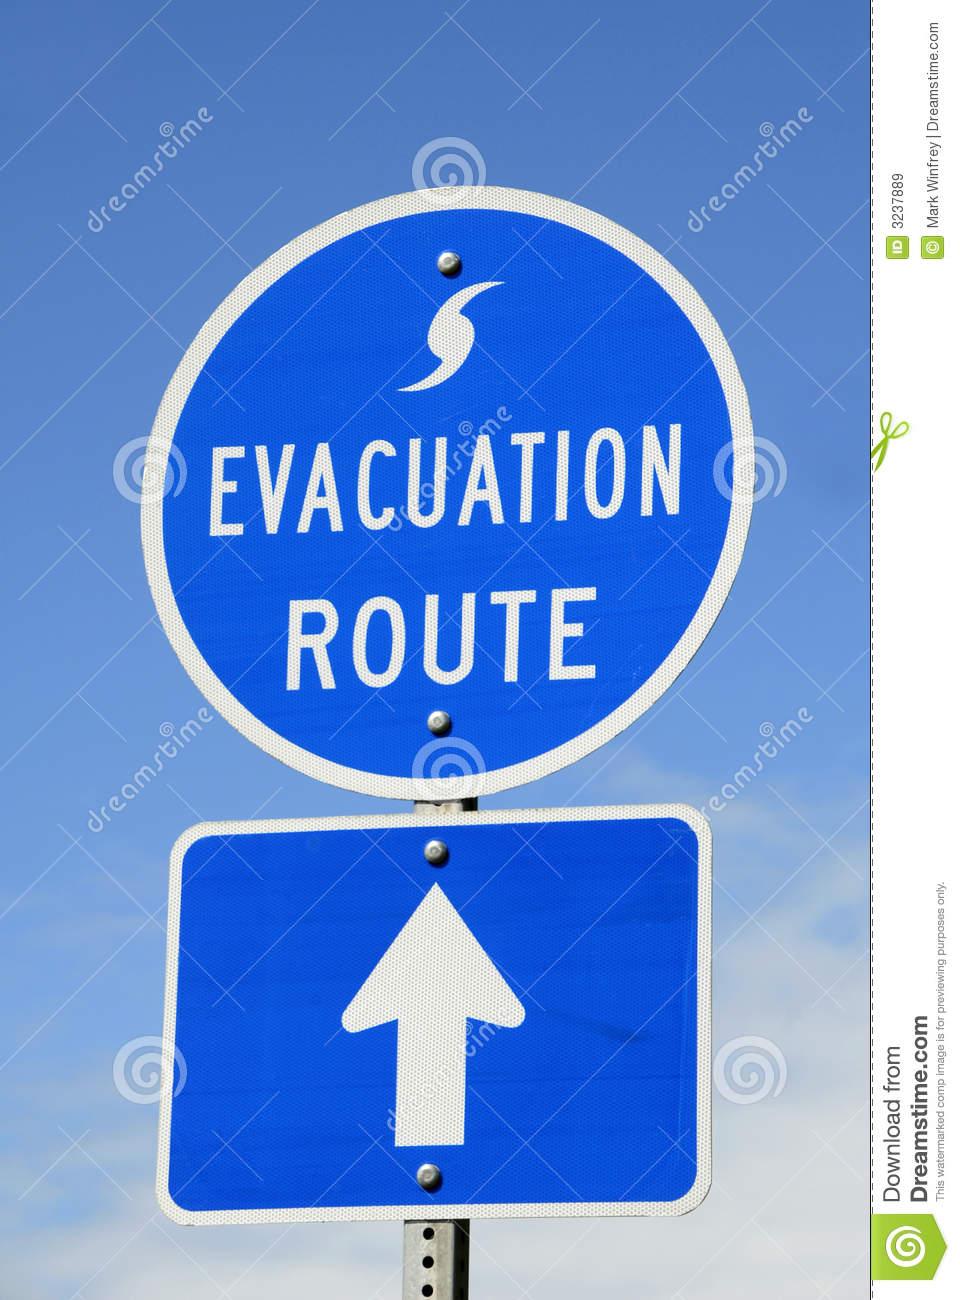 Evacuation Route Sign Royalty Free Stock Images   Image  3237889